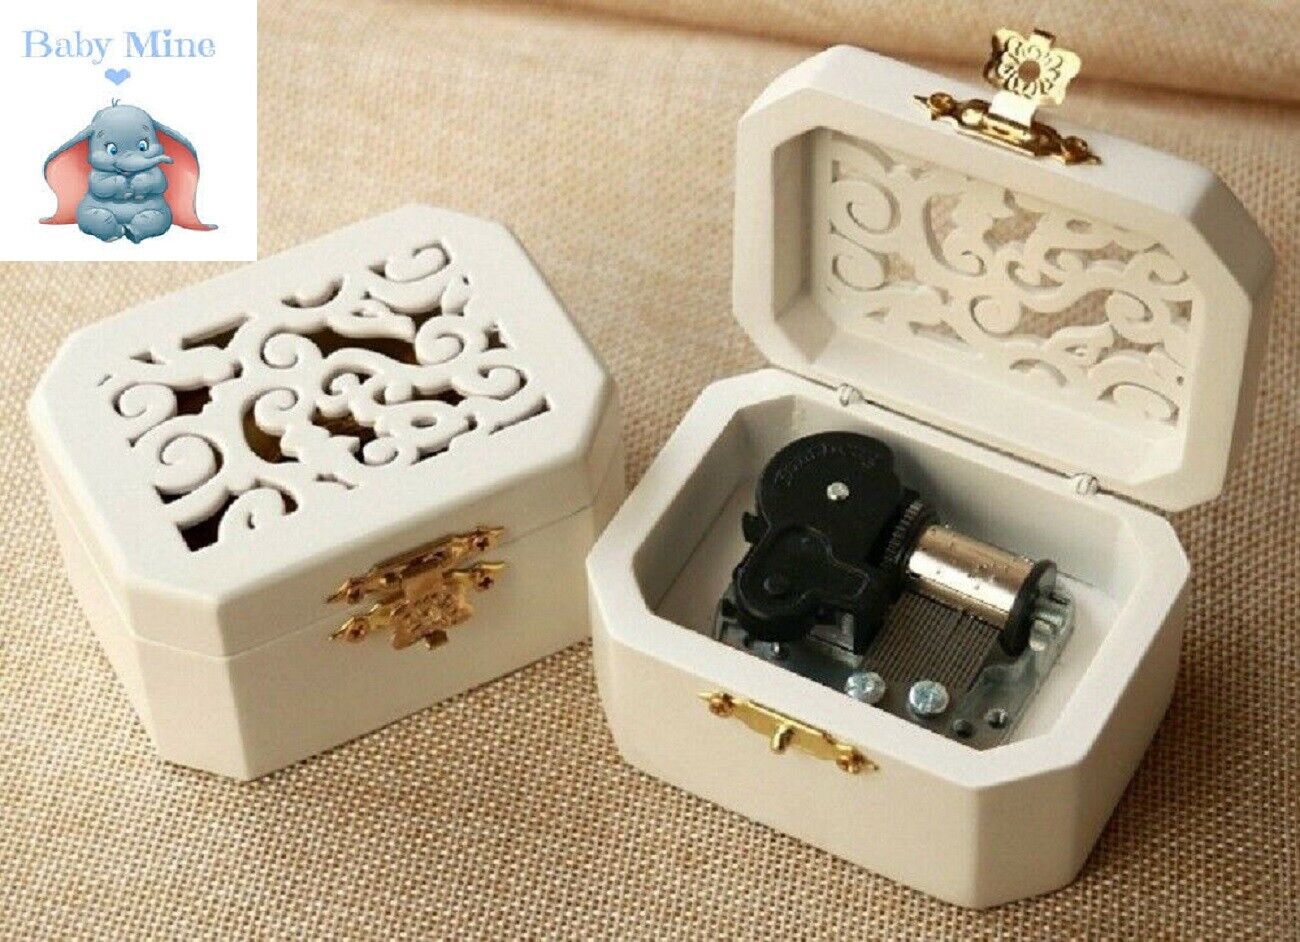 WHITE WOOD OCTAGON CARVING MUSIC BOX ♫  BABY MINE ♫